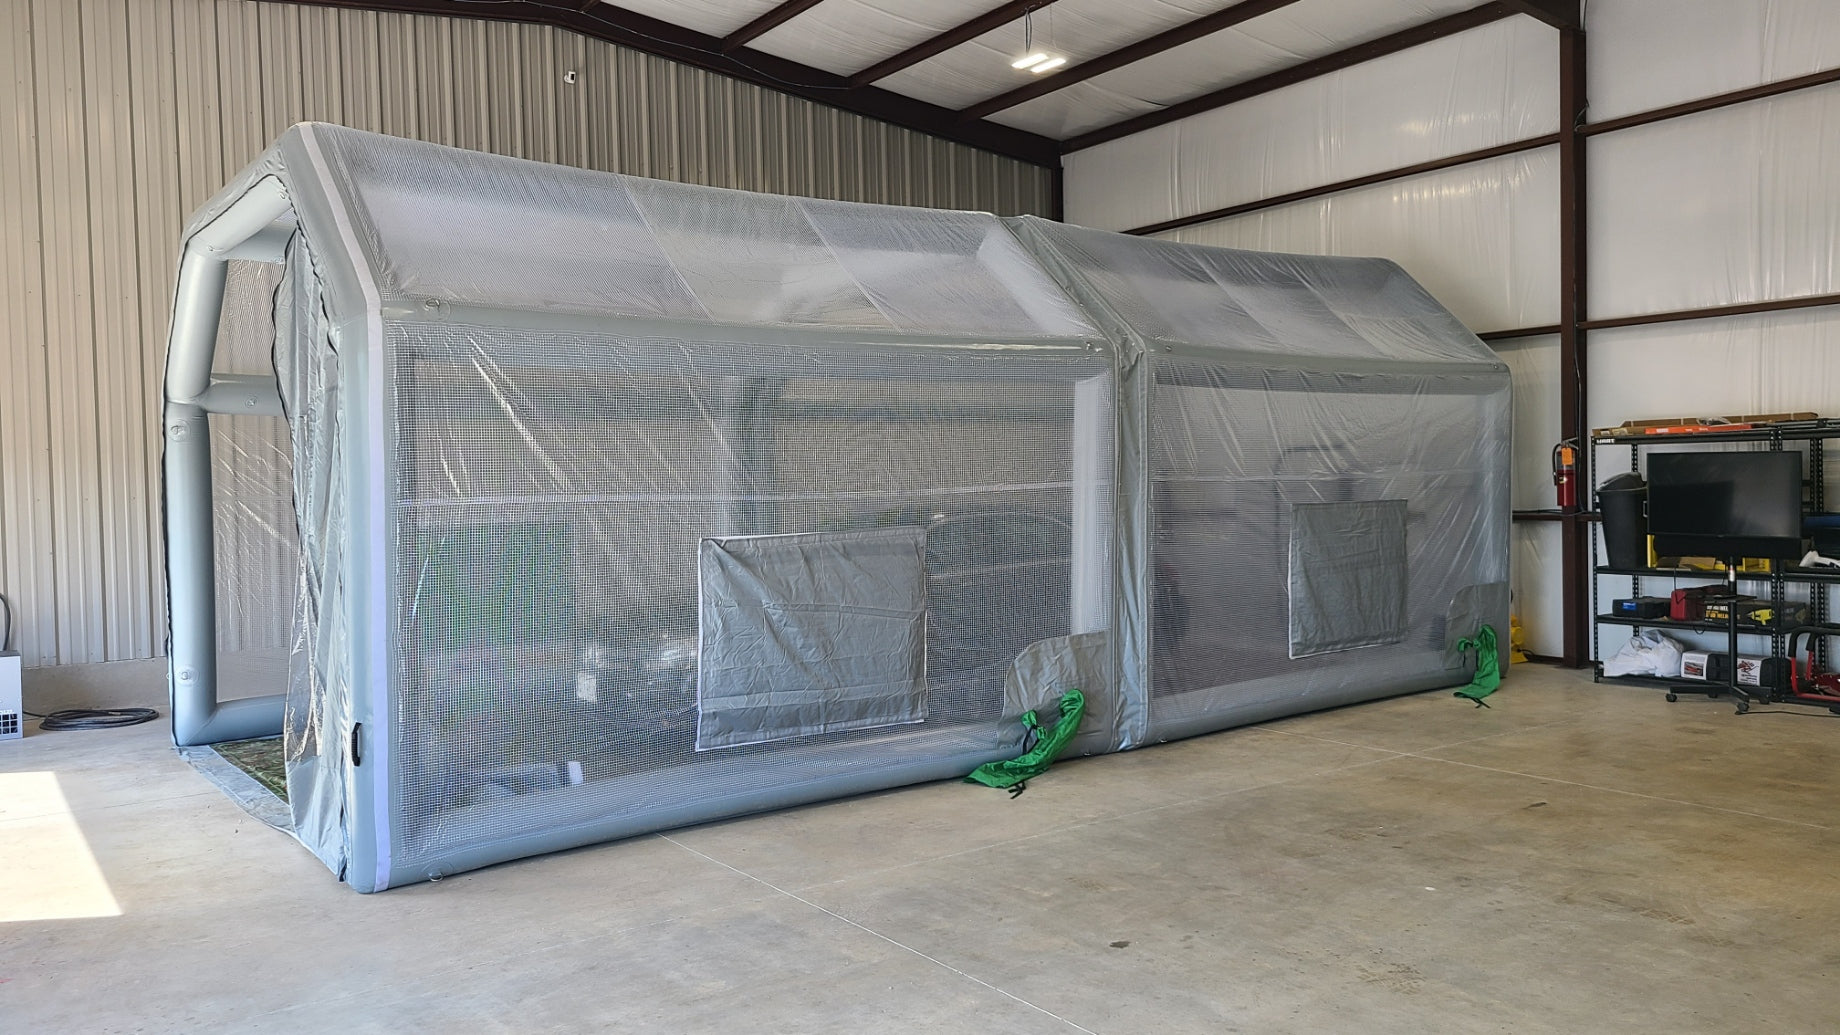 Custom Sewinfla Airtight Waterproof Paint Booth 24x15x10FT with 2 Blowers (1100W+1100W) -New Version Airtight Spray Paint Booth Durable Portable Paint Booth Perfect Solution for Overspray Problem